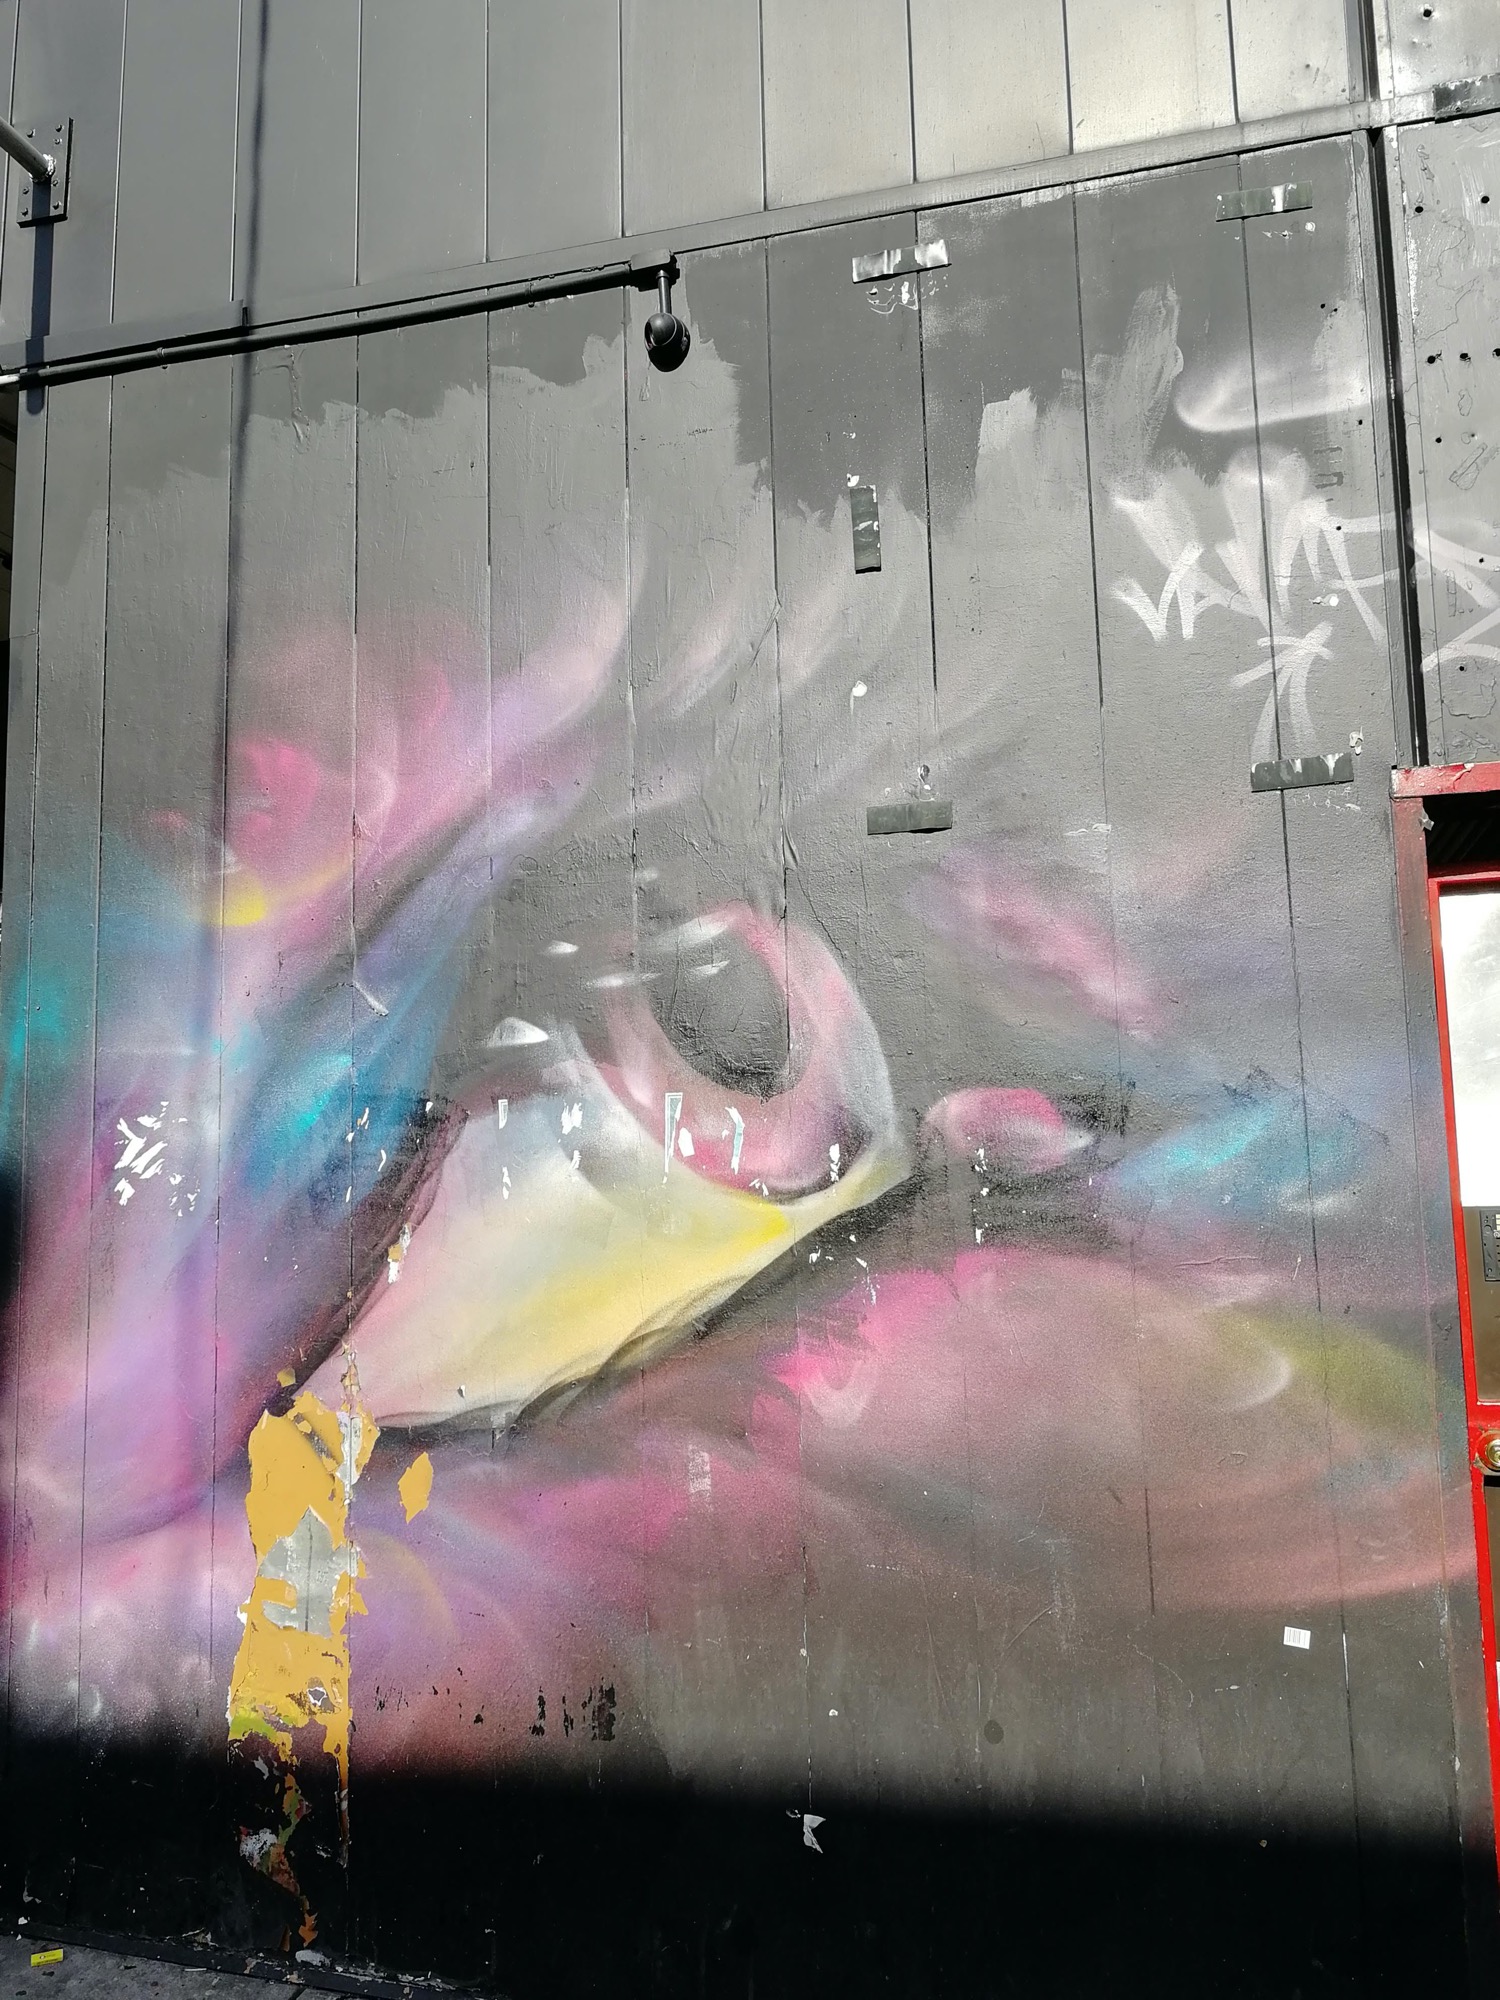 Graffiti 2408  captured by Rabot in Toronto Canada